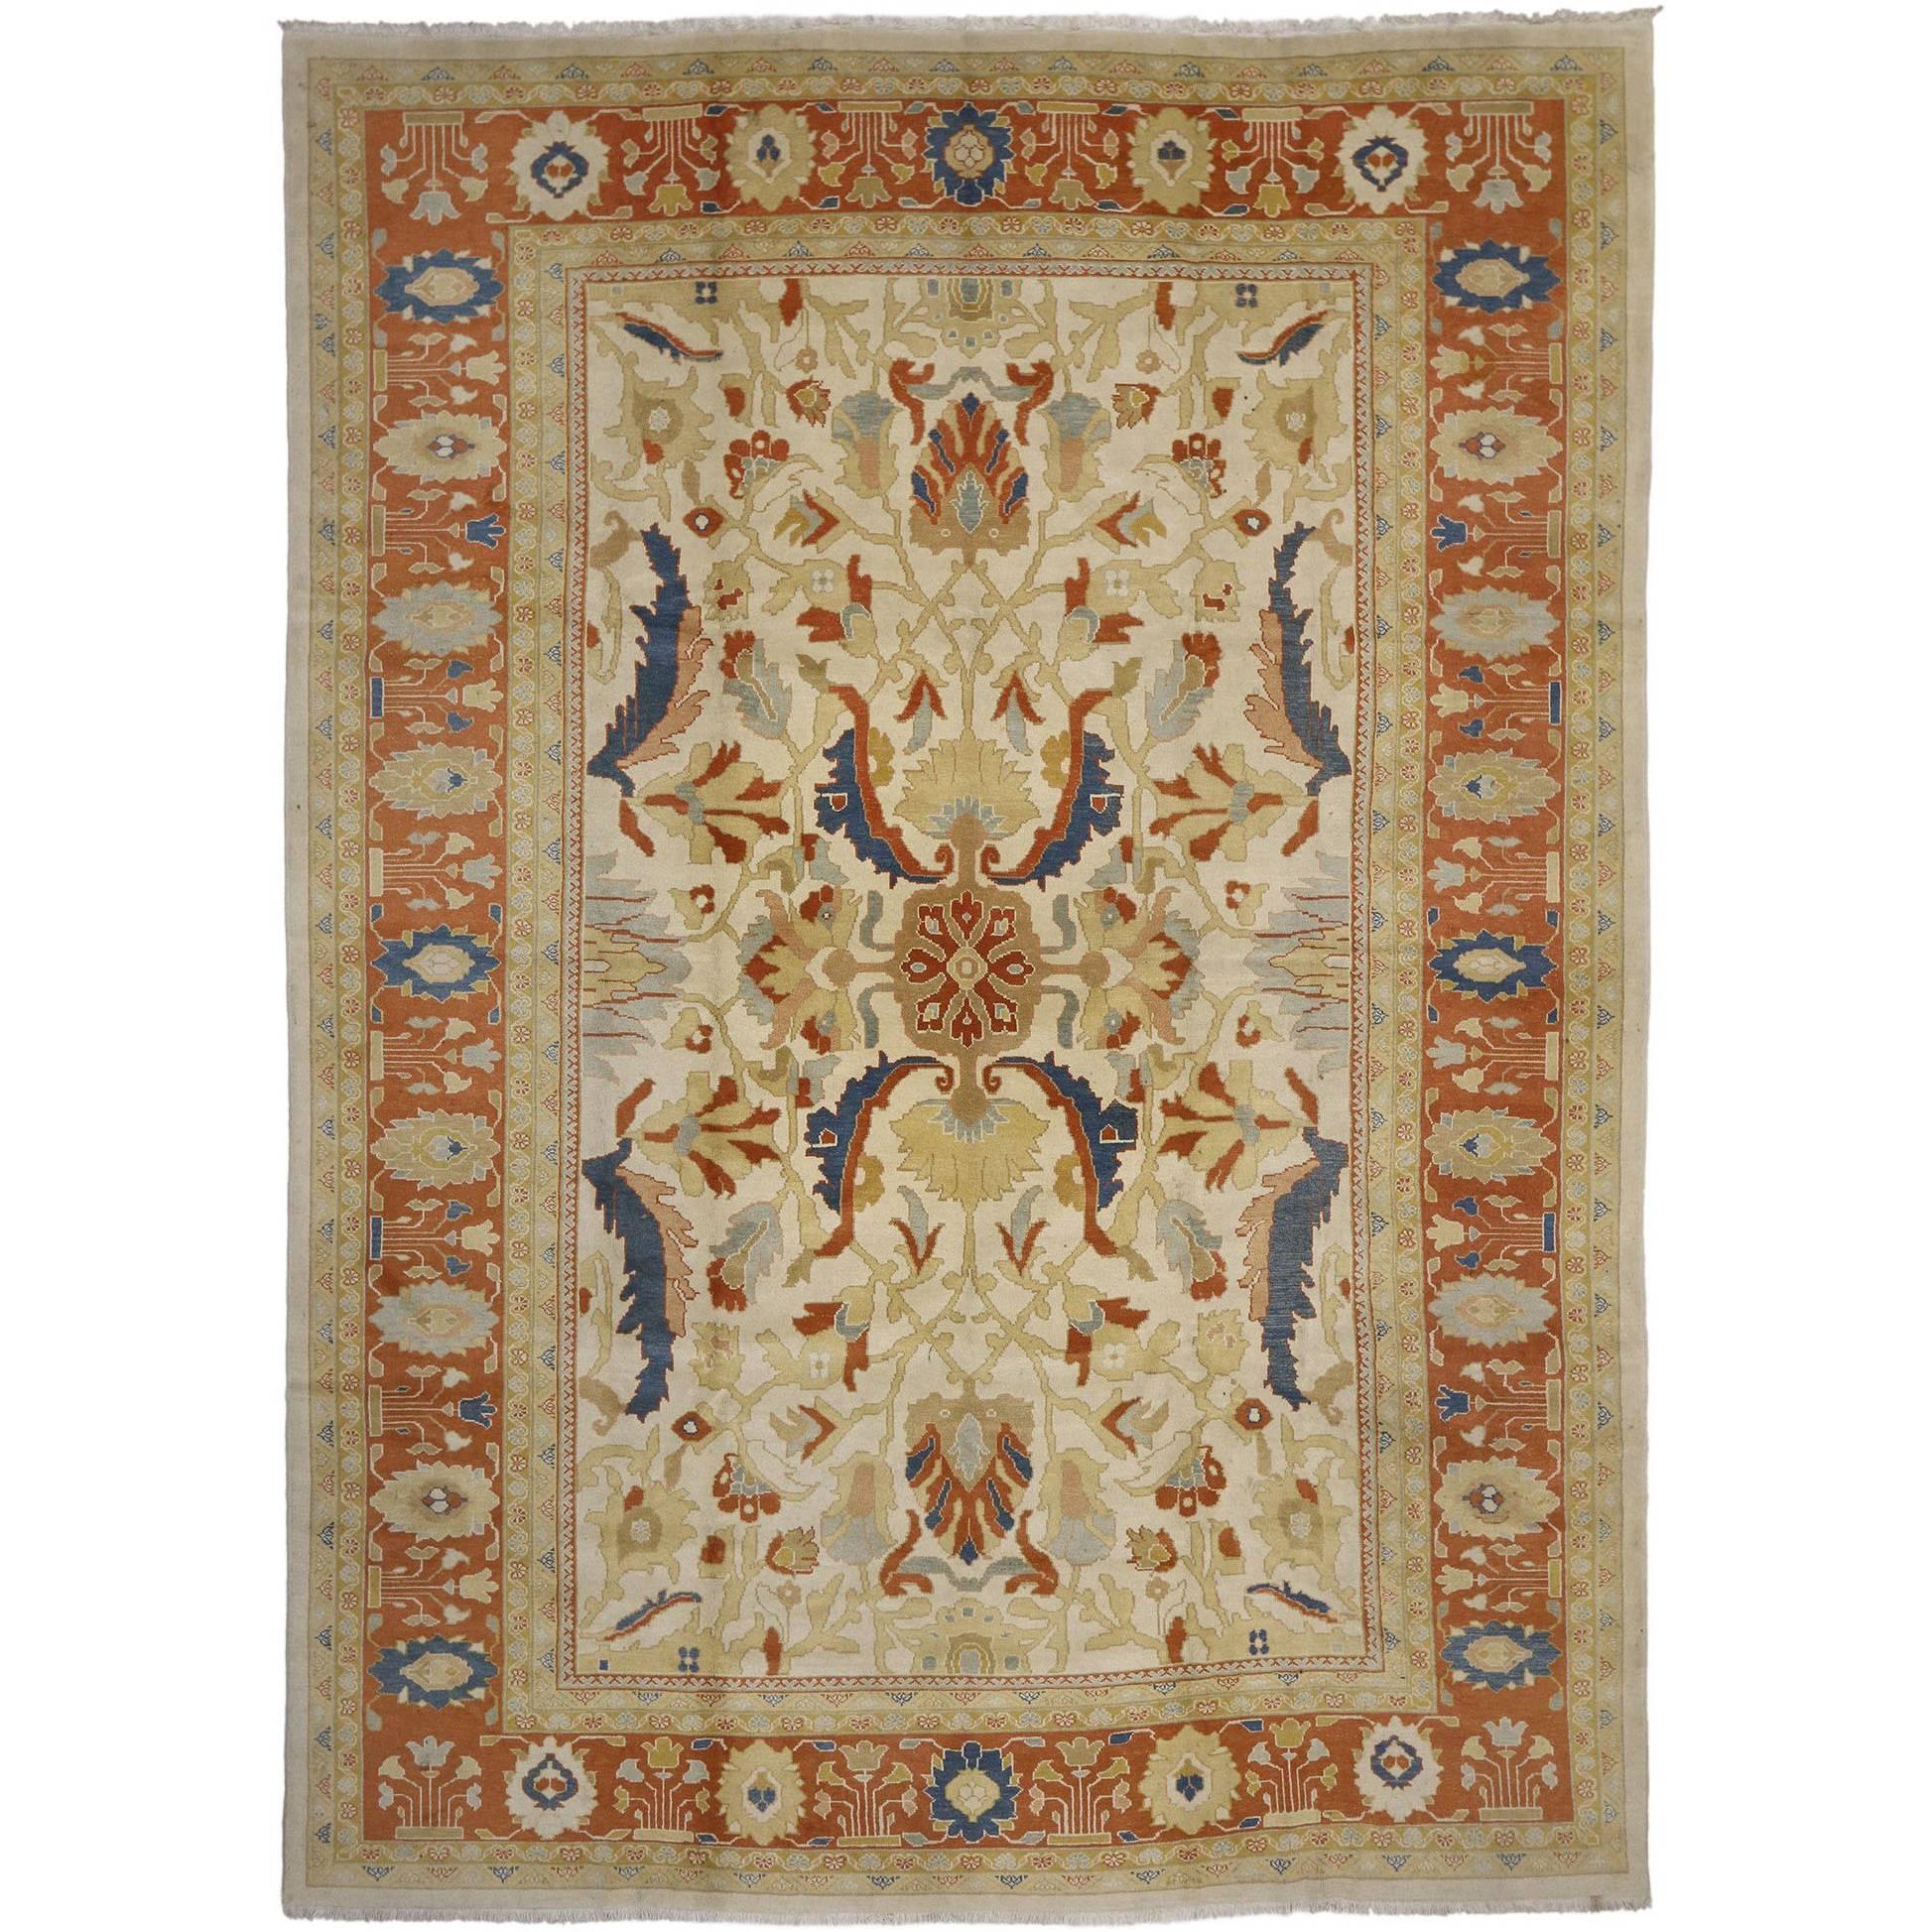 Vintage Persian Mahal Rug with Mediterranean Style and Curled Sickle Leaf Design